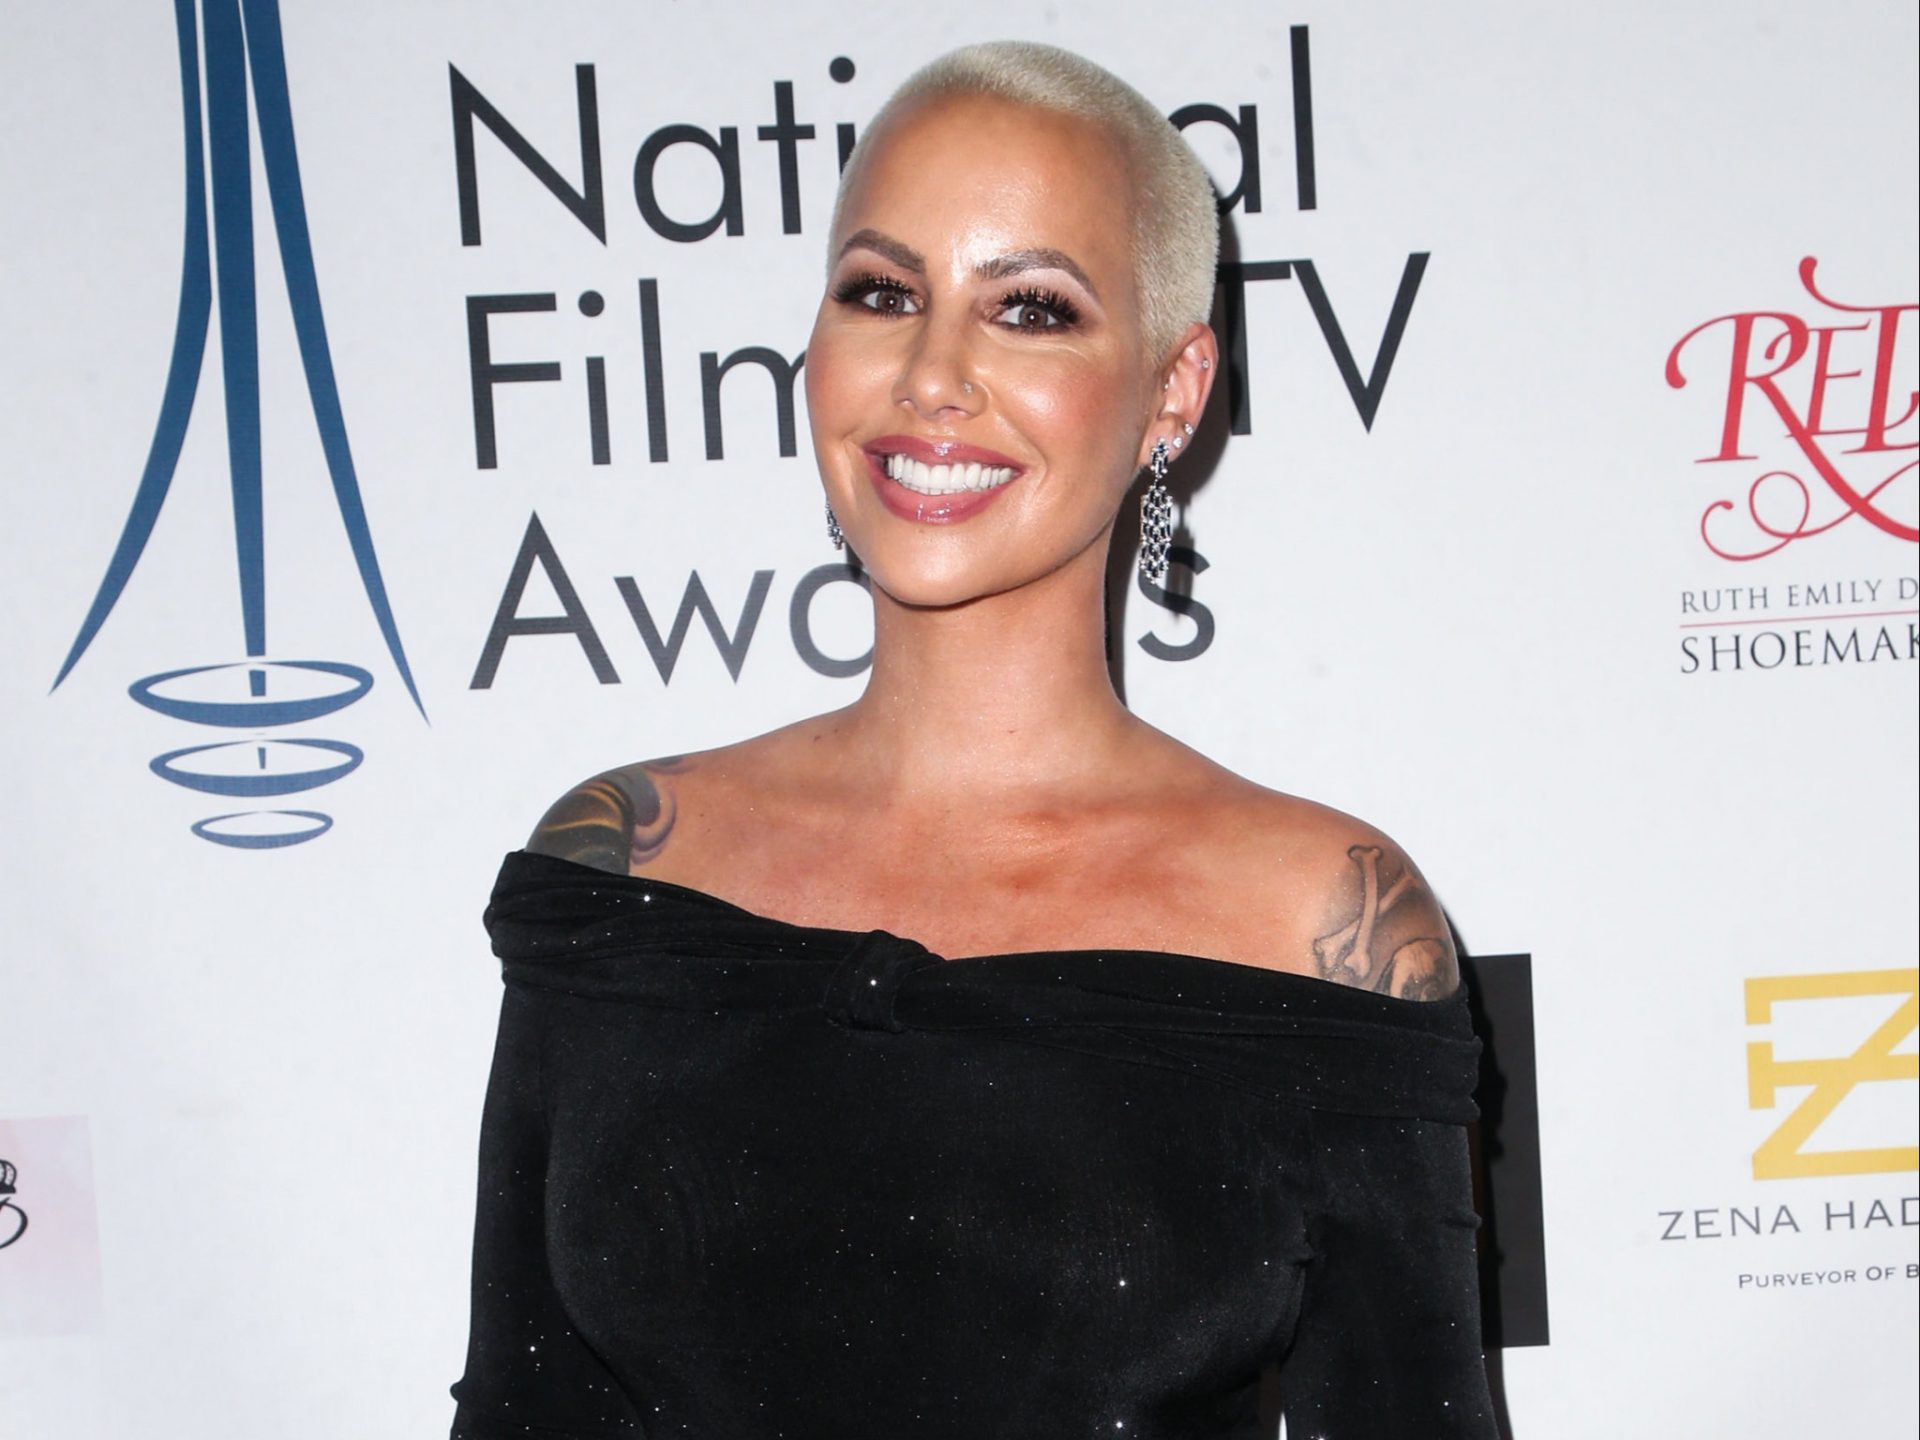 Amber Rose offers to toss salads for Super Bowl tickets; celebs respond